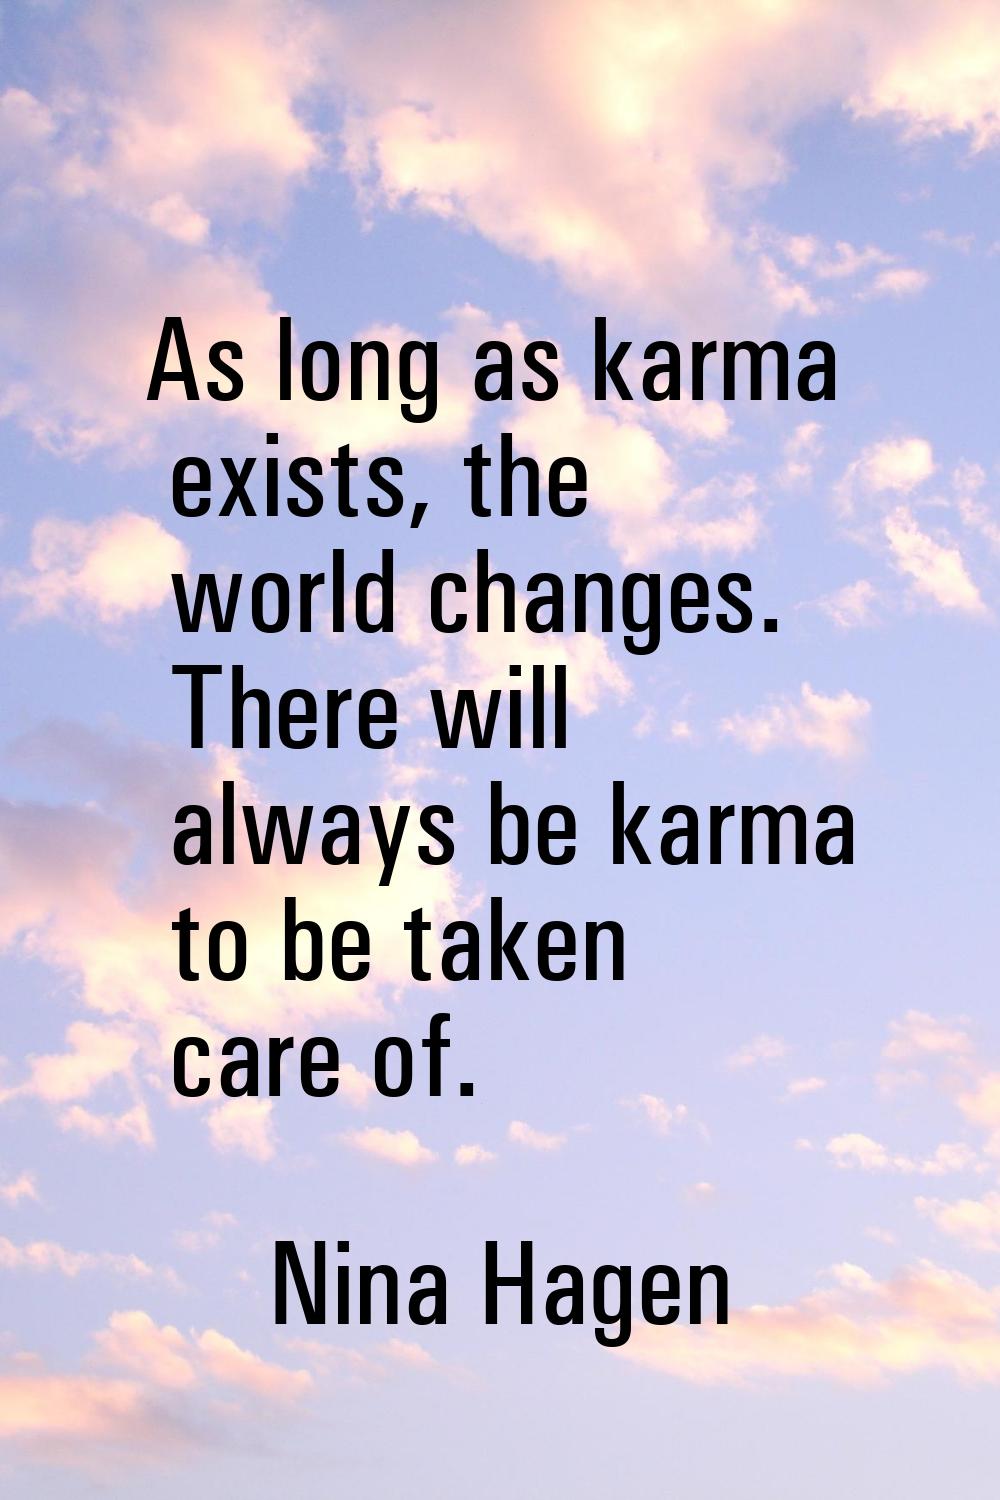 As long as karma exists, the world changes. There will always be karma to be taken care of.